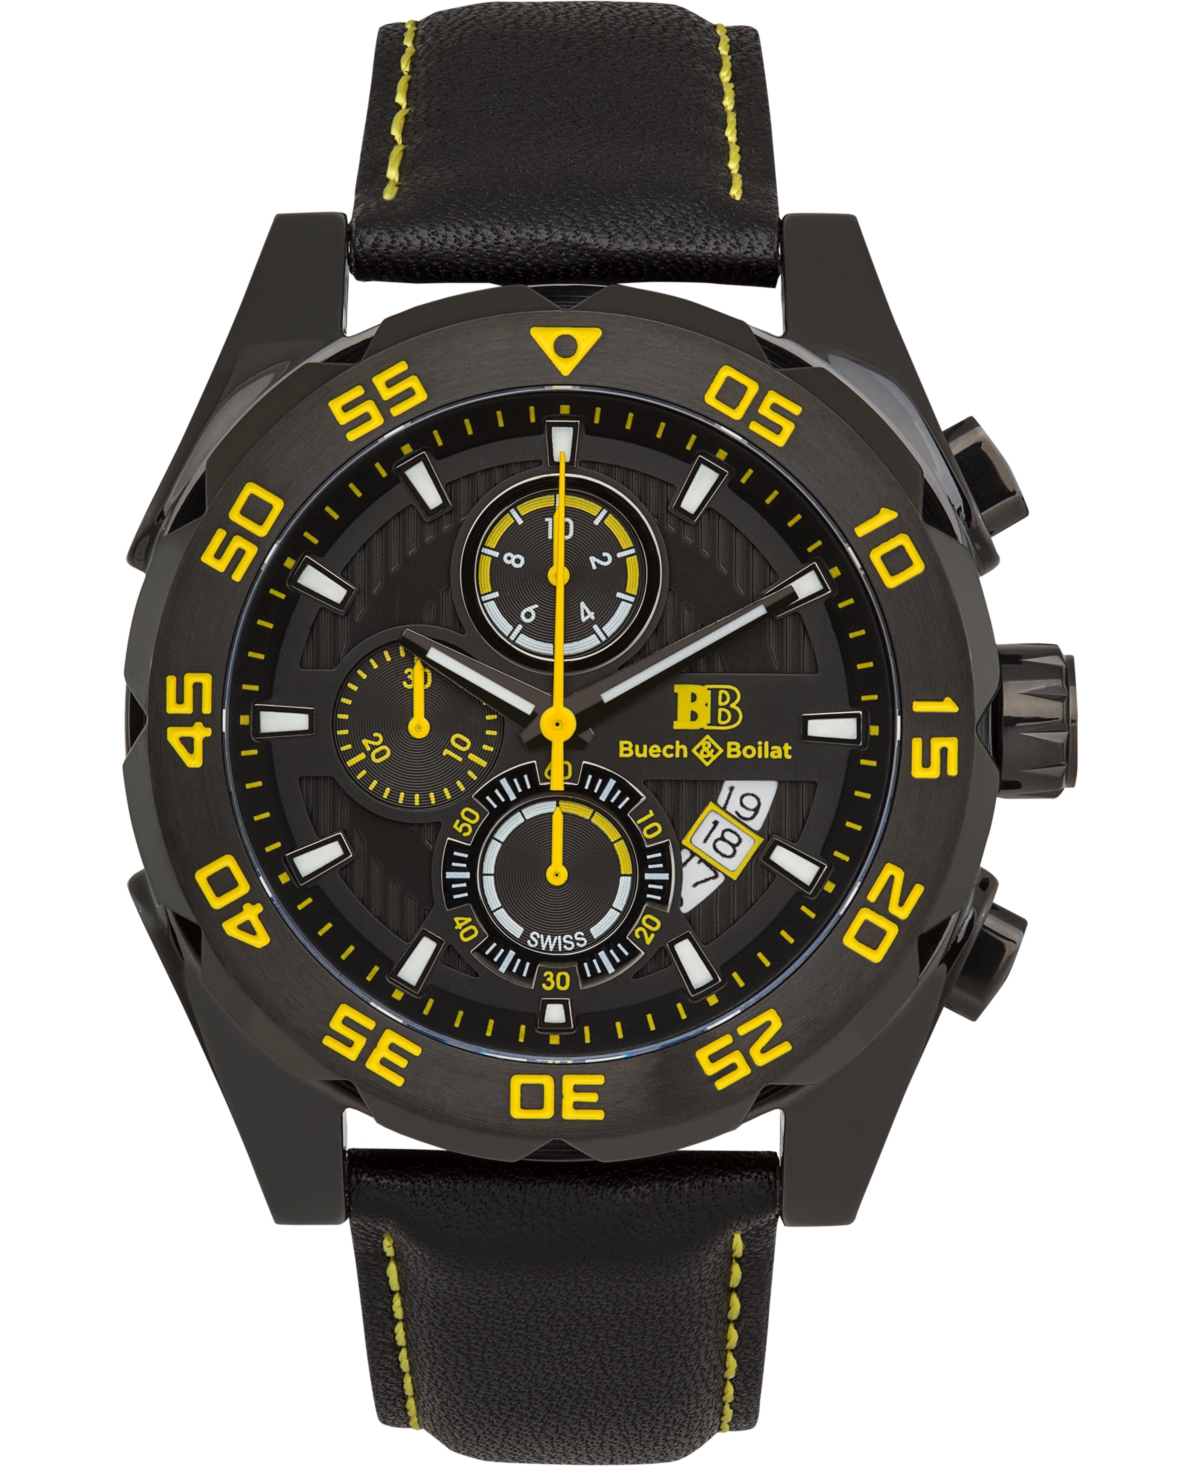 Torrent Men's Chronograph Watch Black Leather Strap, Black and Yellow Dial, 44mm - Black